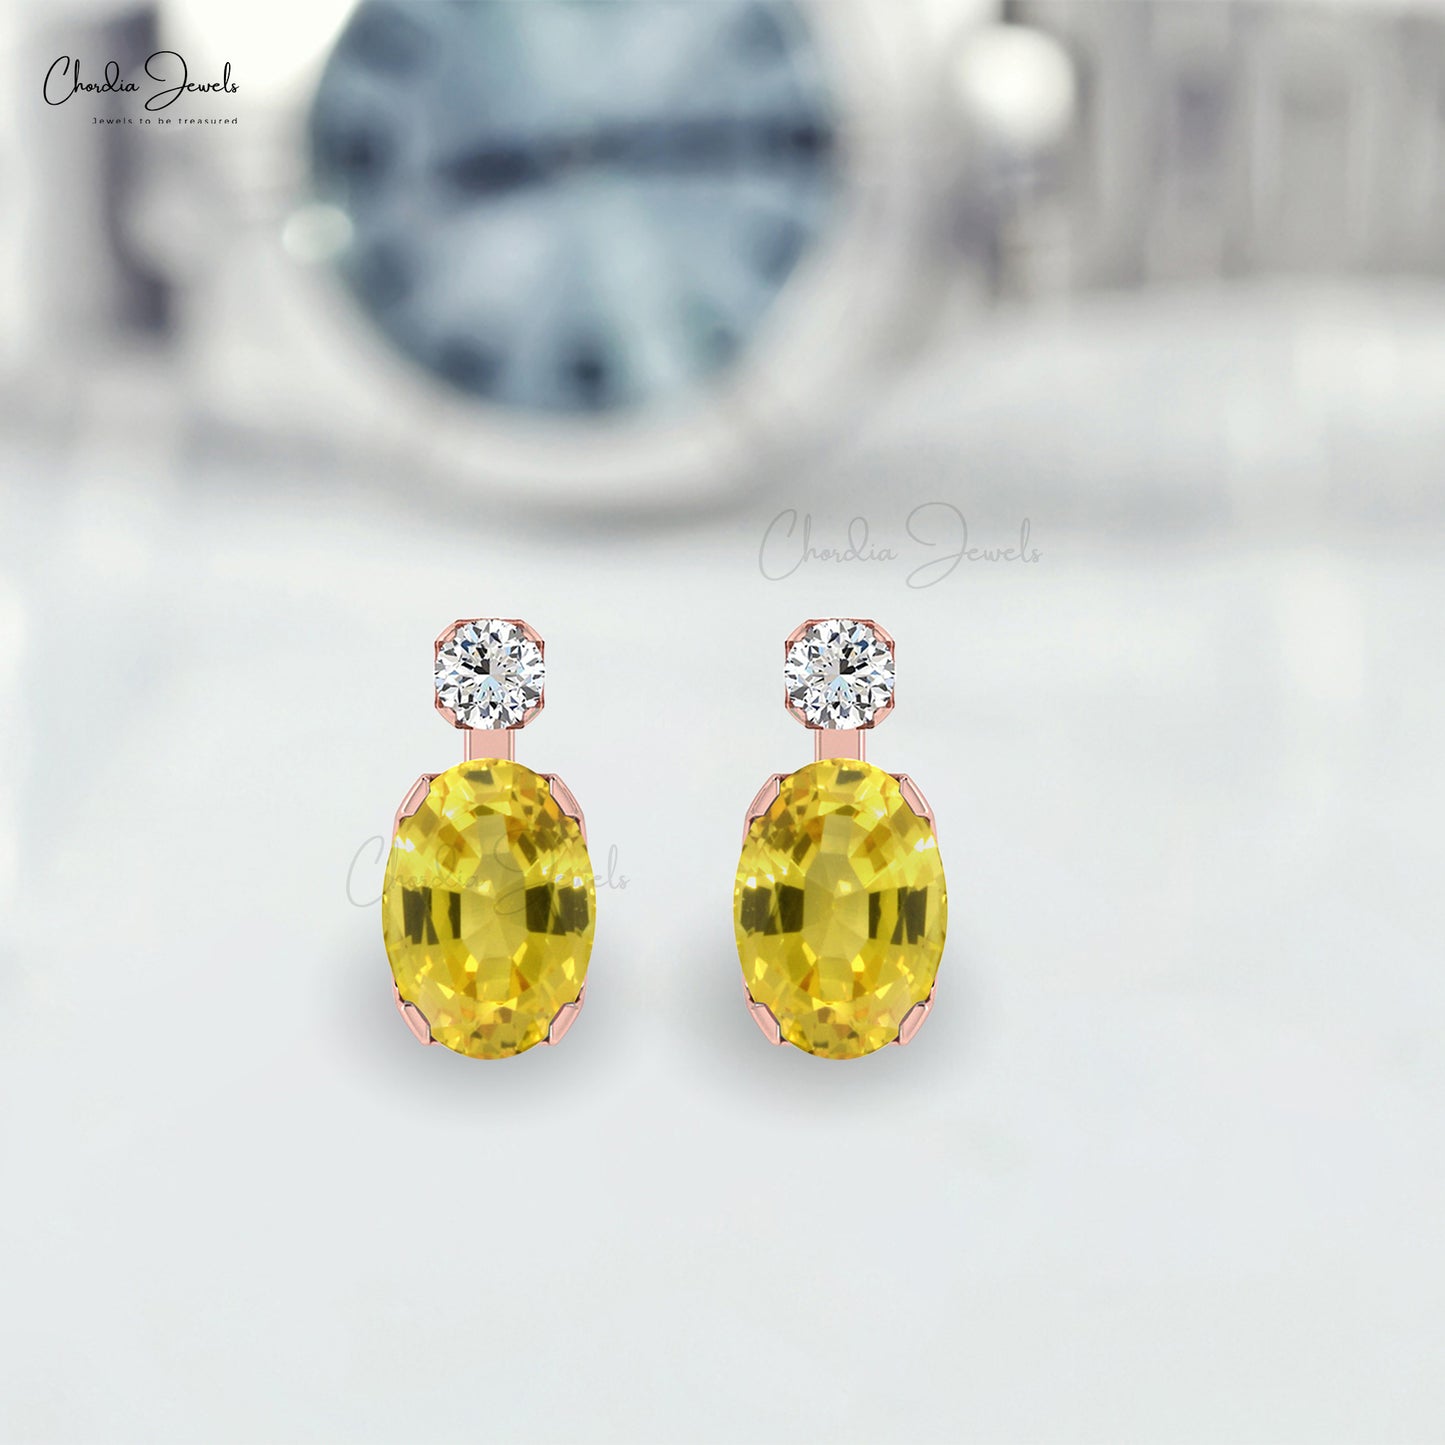 AAA Yellow Sapphire Earrings 0.94Ct Oval Cut Natural Gemstone Summer Jewelry 14k Real Gold Diamond Earrings For Surprise Gift